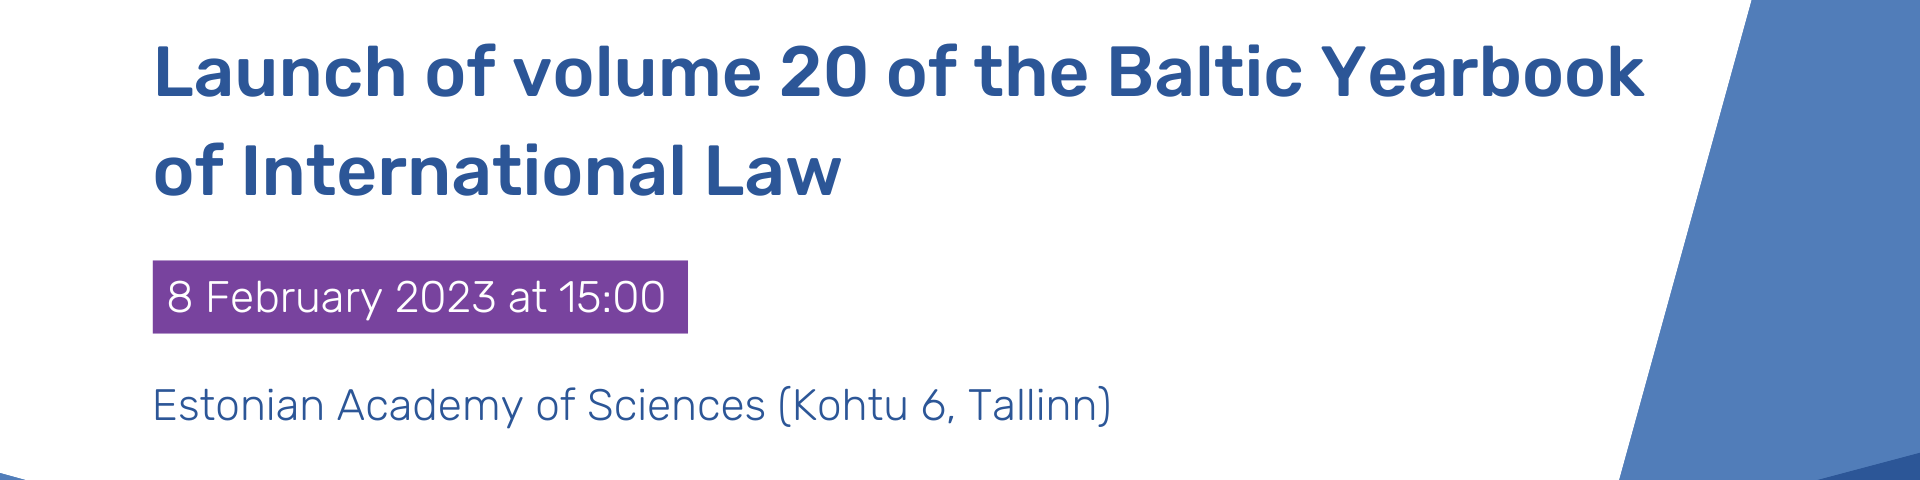 Launch of volume 20 of the Baltic Yearbook of International Law